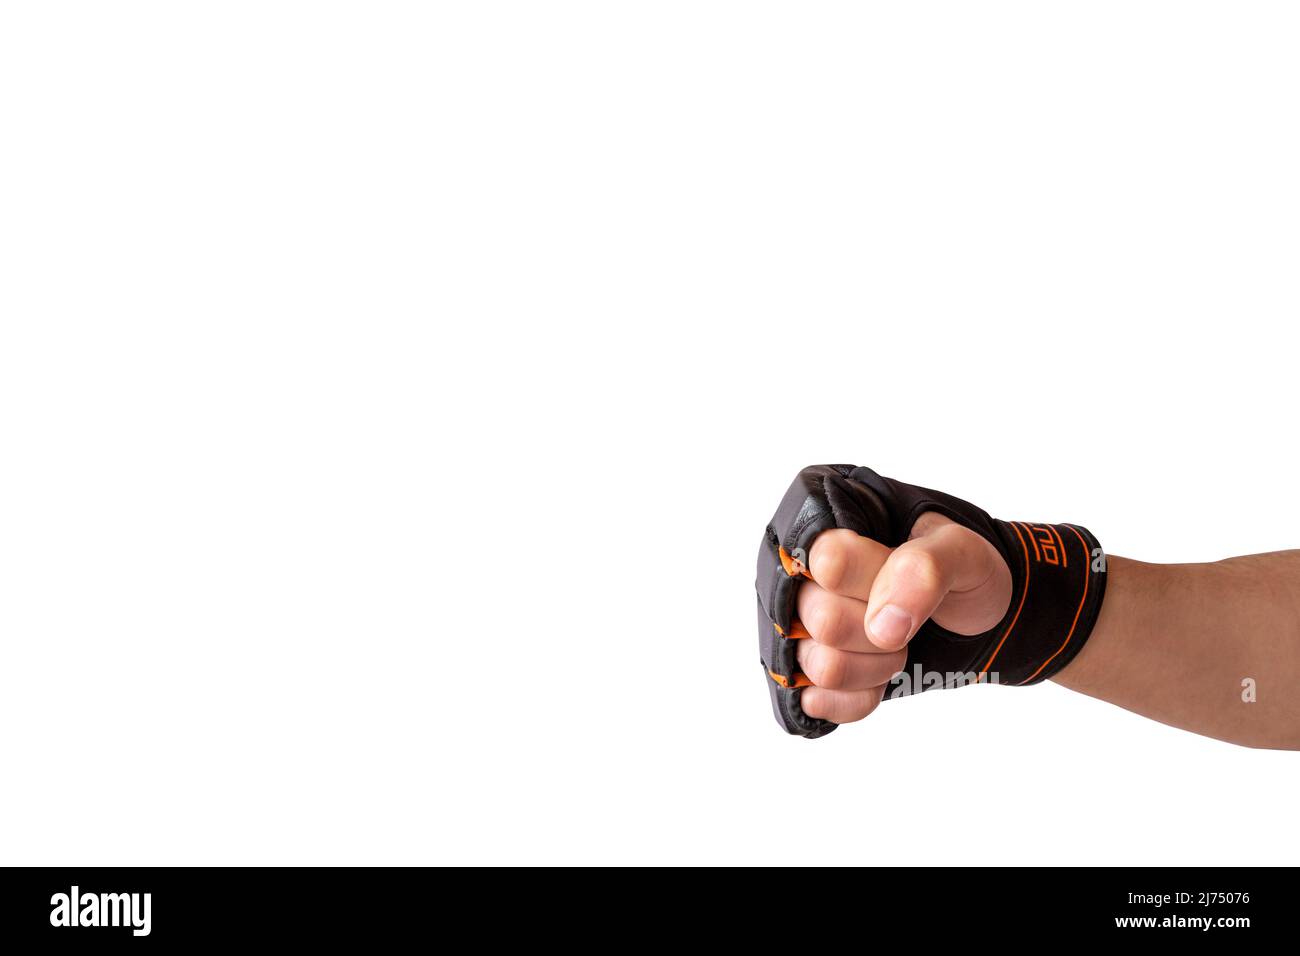 Kickboxing gloves with arm isolated on white background, copy space Punching with boxing gloves, front view, kickboxing fist blank space idea Stock Photo